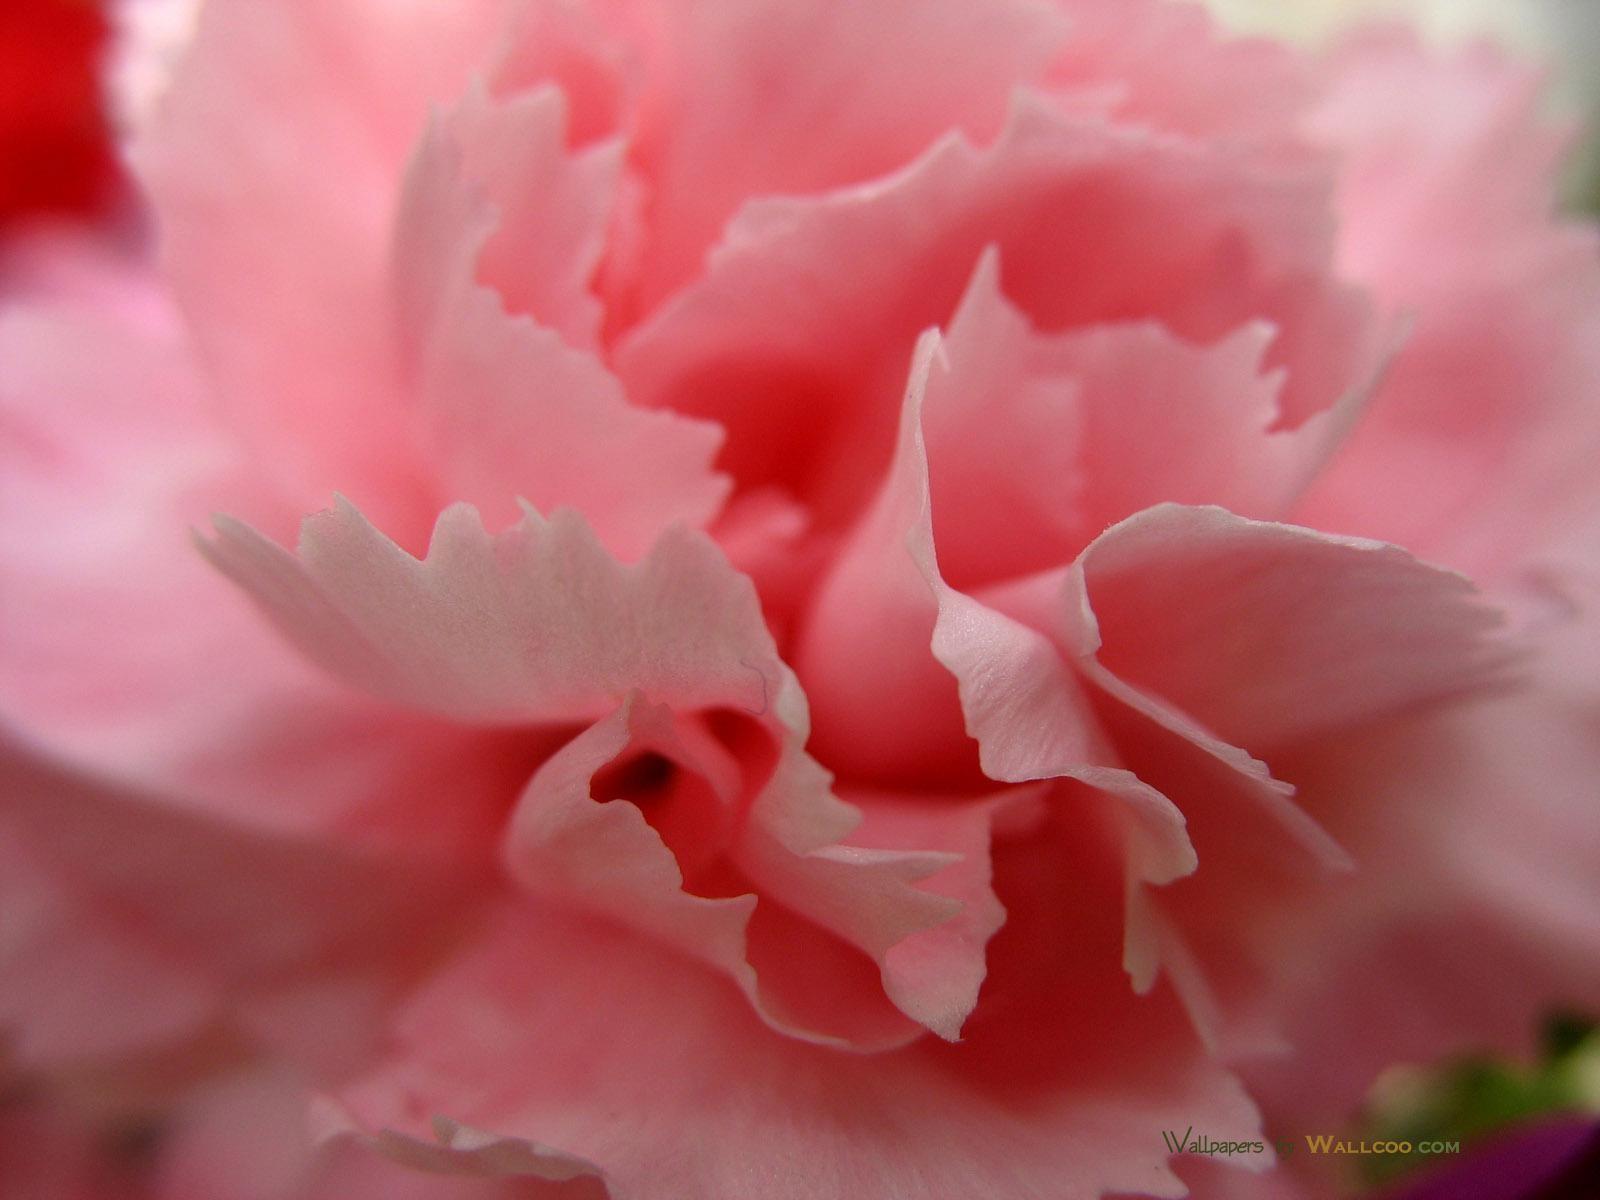 Flower: Close Up Pink Carnation Petals Bloom Nature Flower Abstract